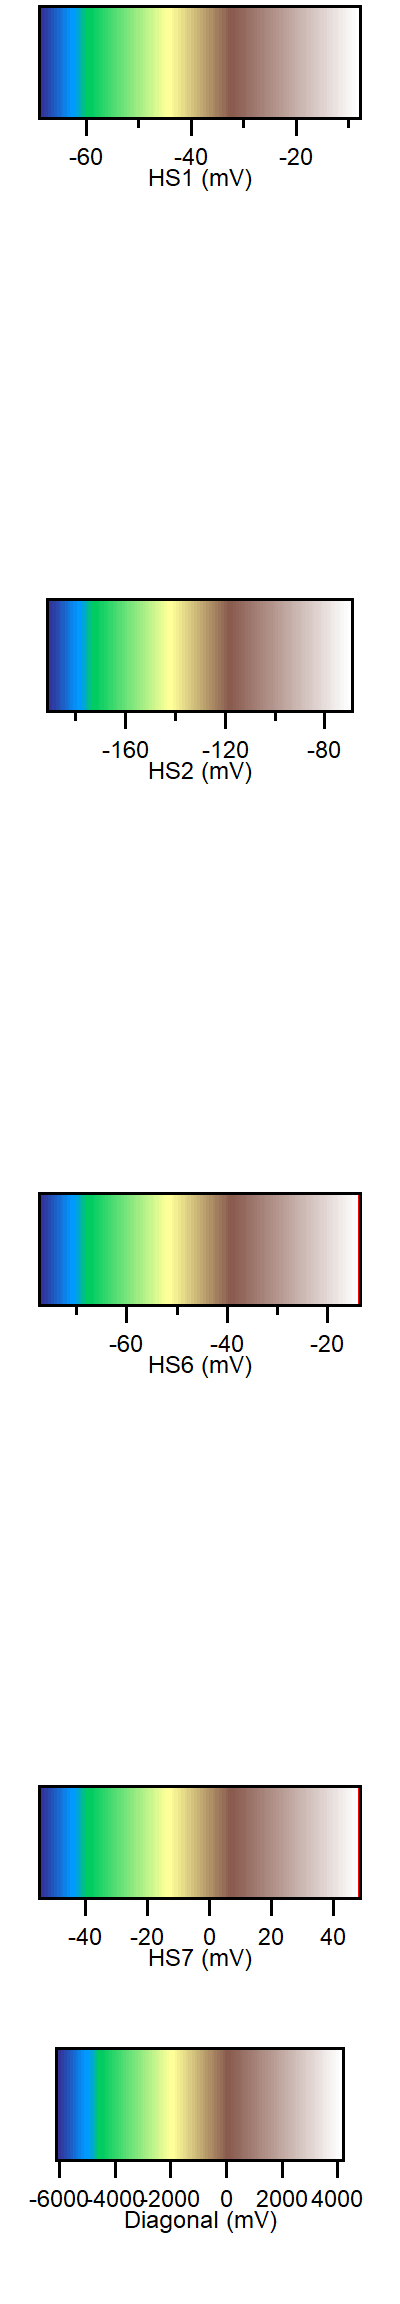 _images/PulseAverage_images_colorscales.png